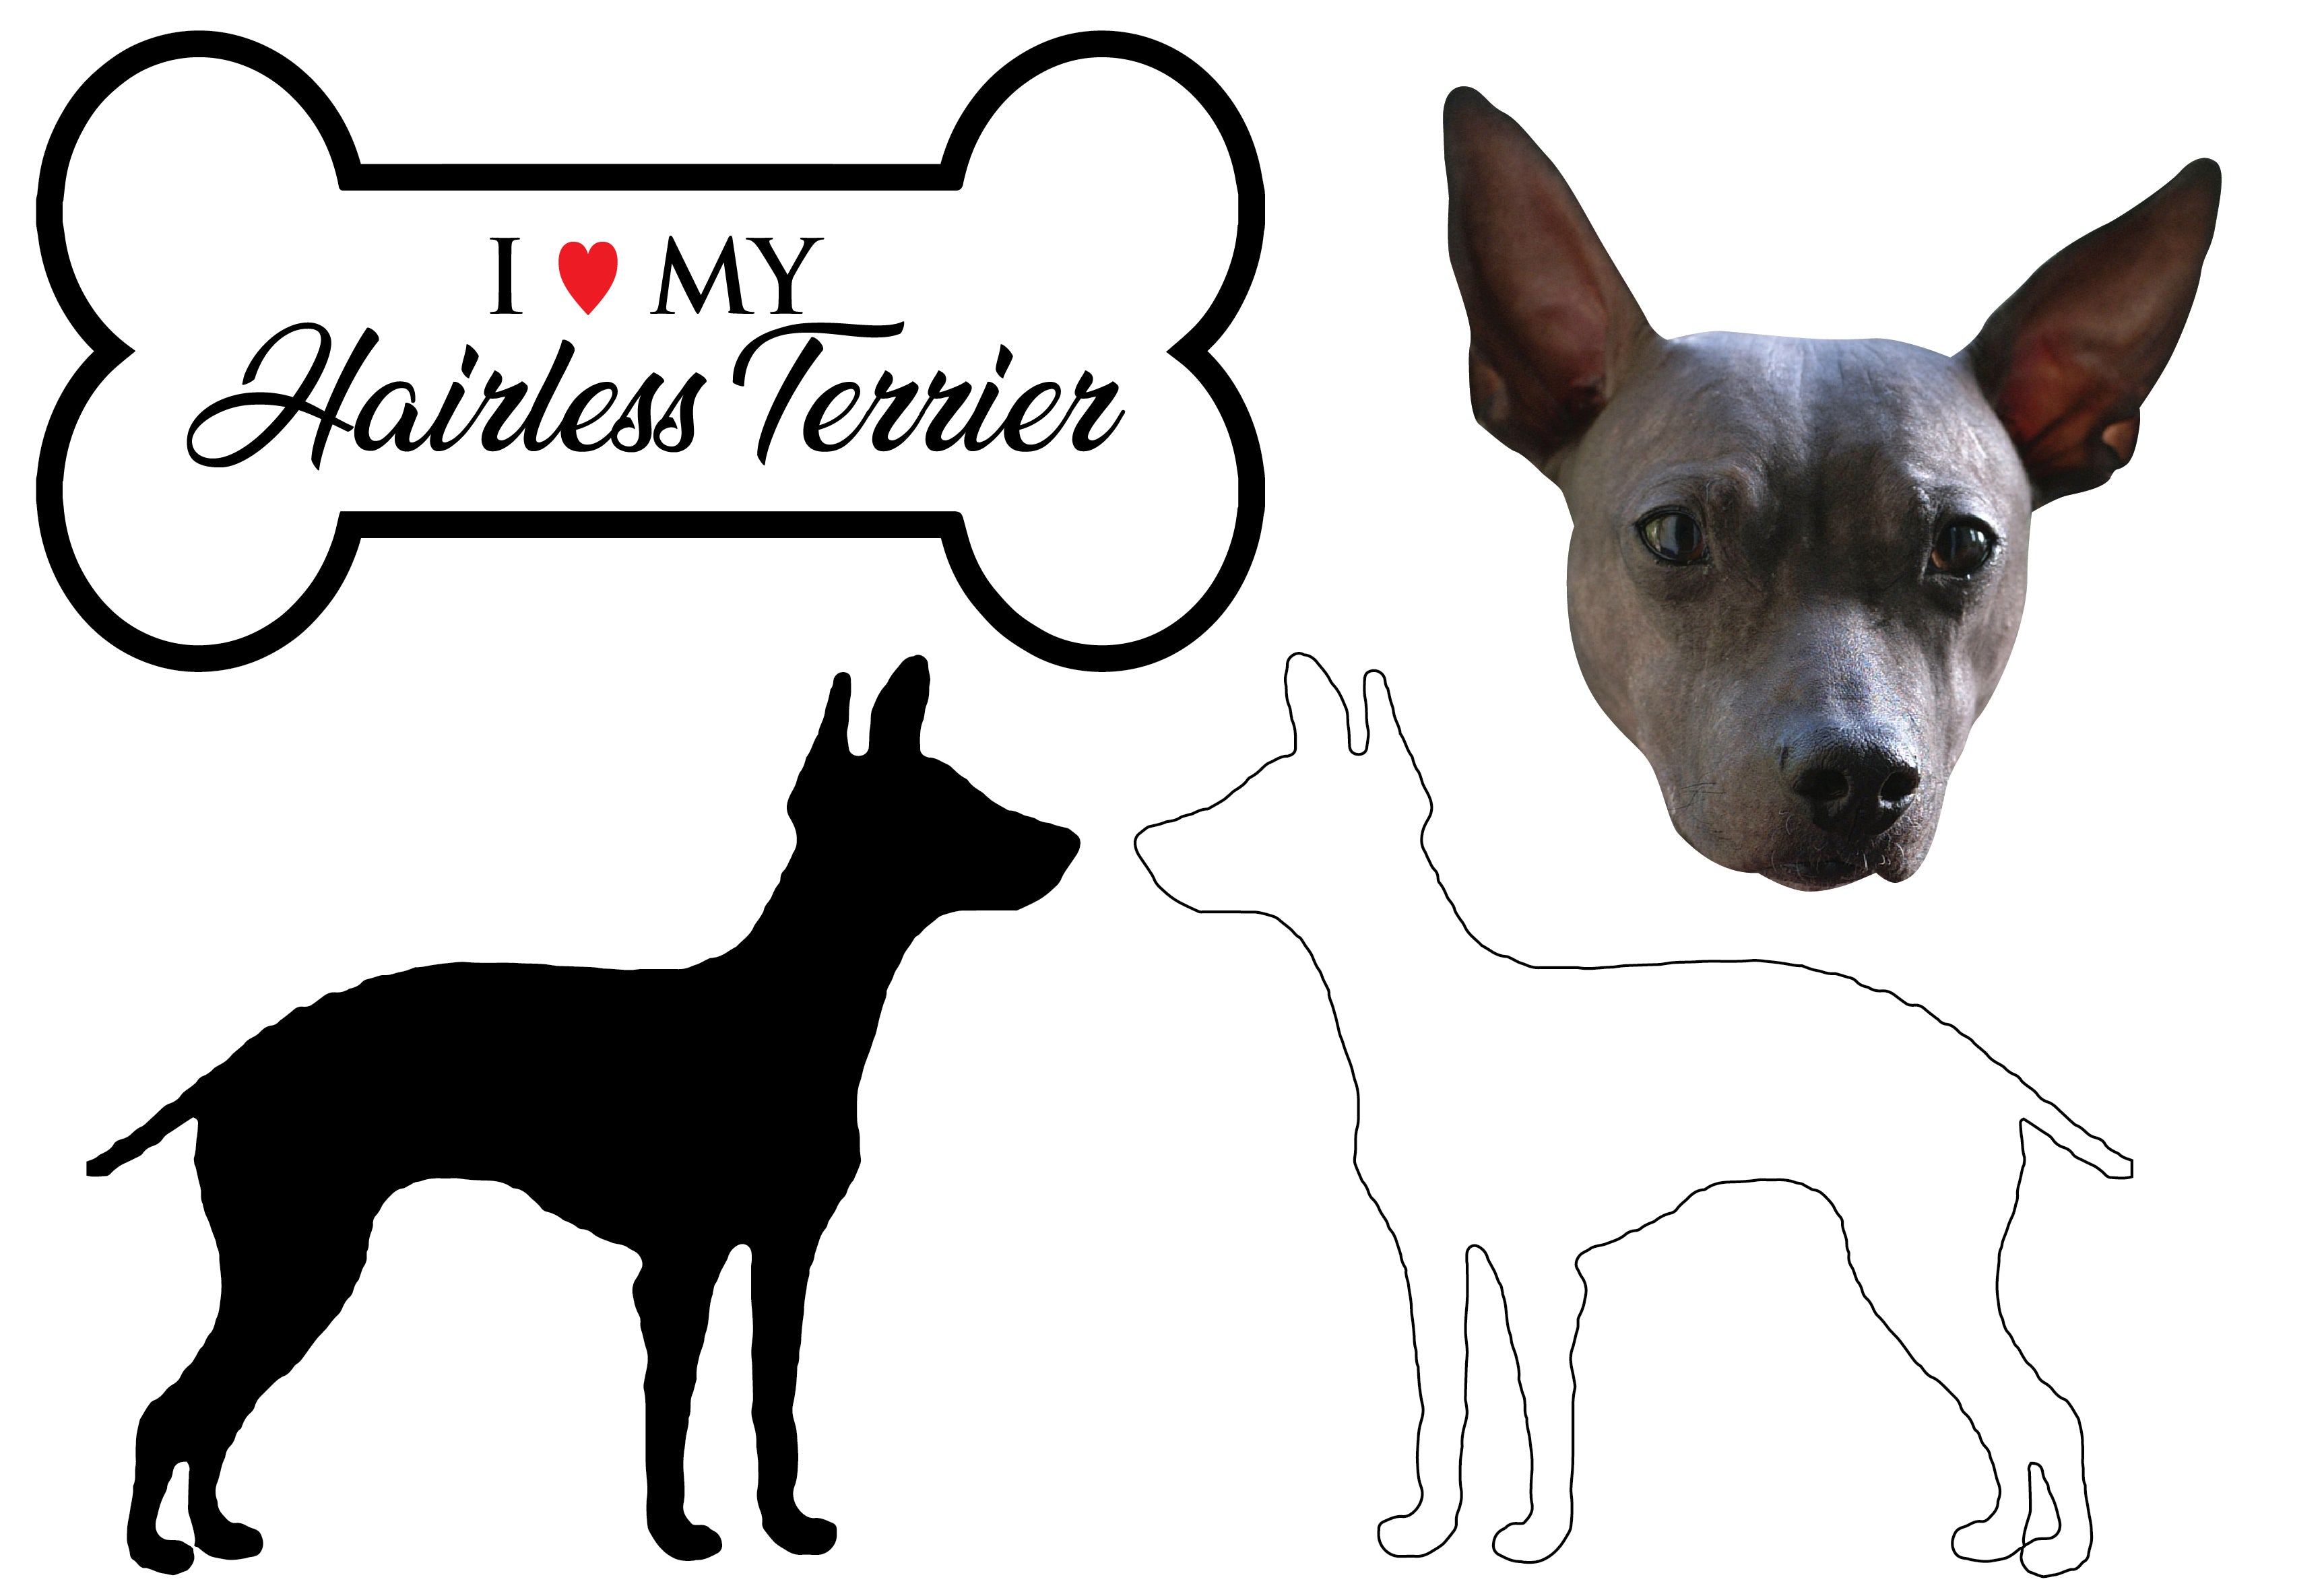 Hairless Terrier - Dog Breed Decals (Set of 16) - Sizes in Description